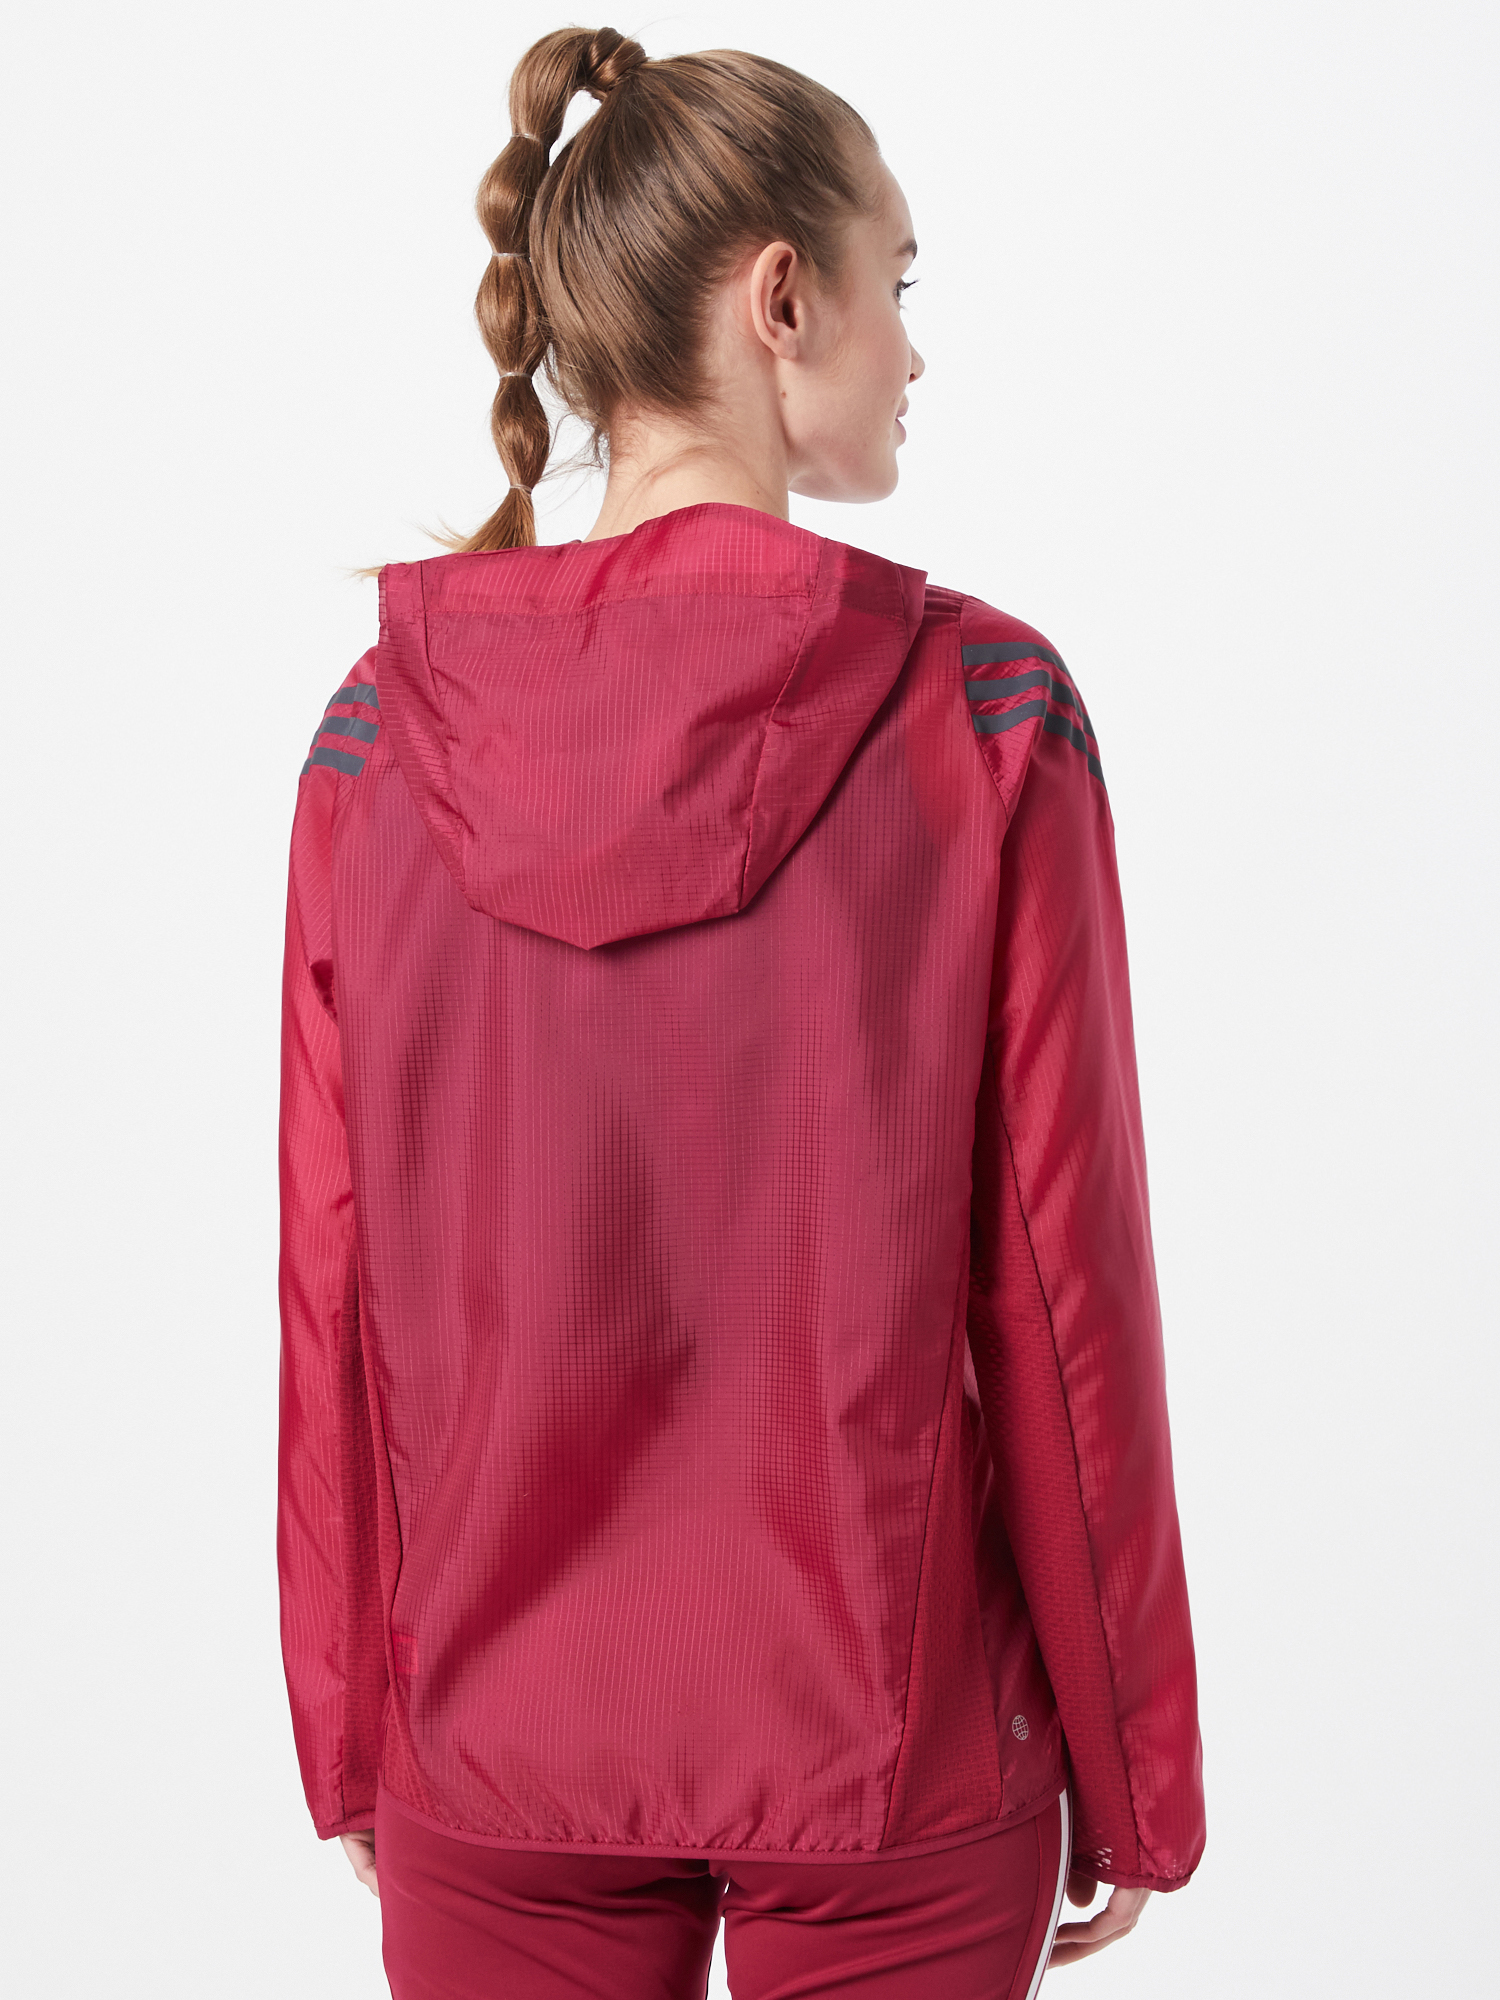 ADIDAS PERFORMANCE Sportjacke in Rot 